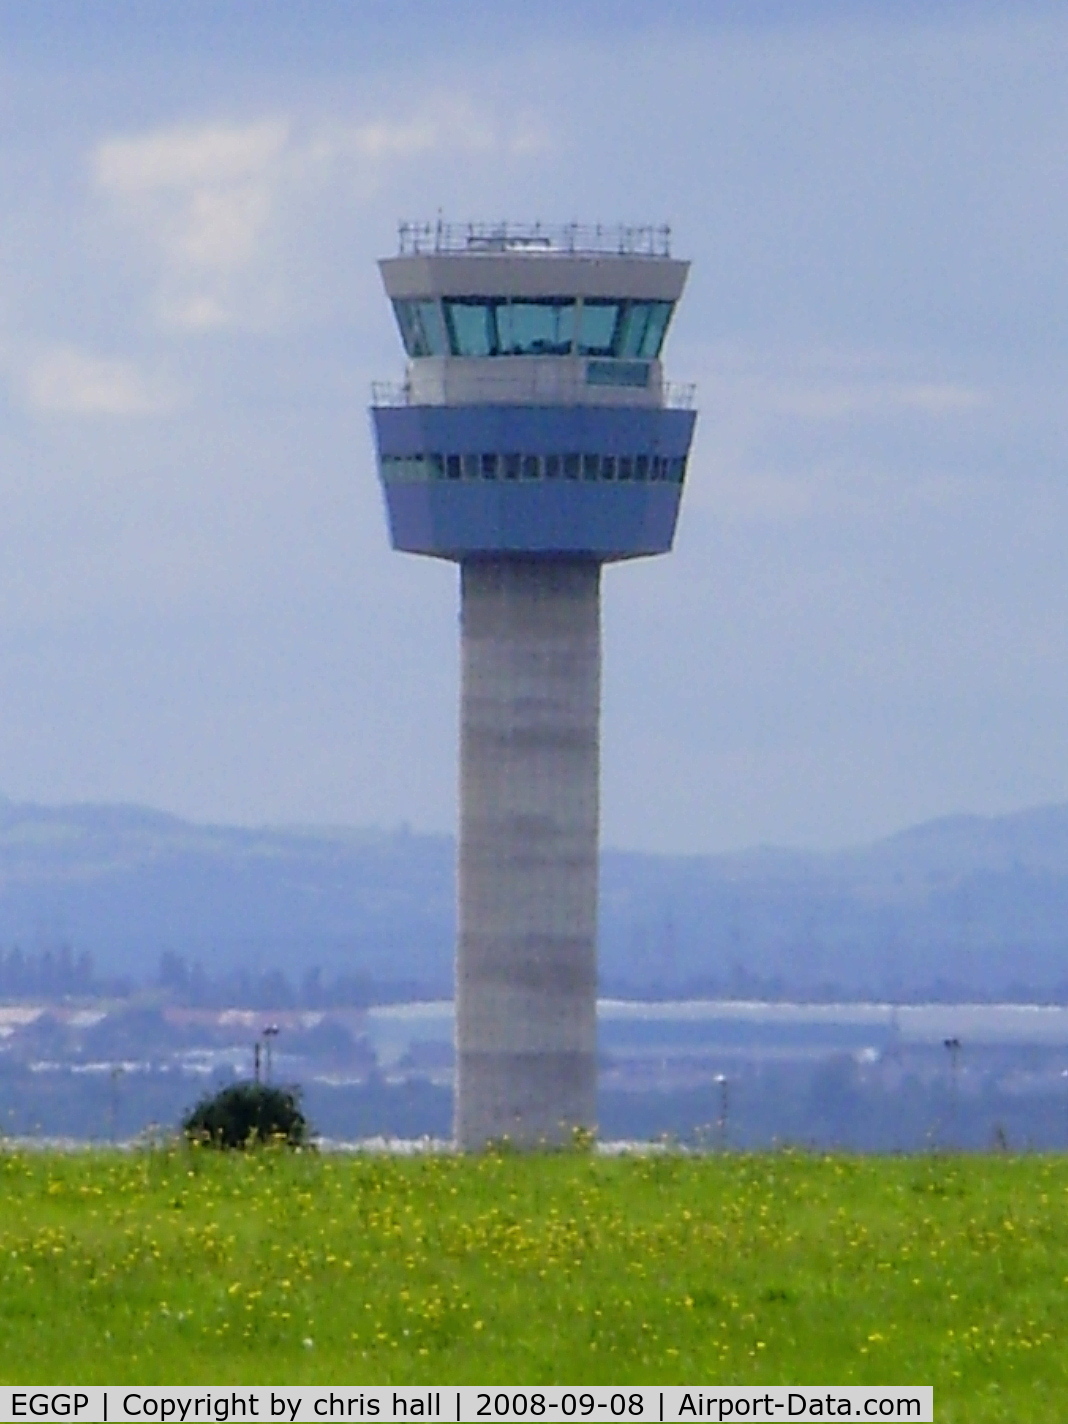 Liverpool John Lennon Airport, Liverpool, England United Kingdom (EGGP) - Control Tower at Liverpool Airport